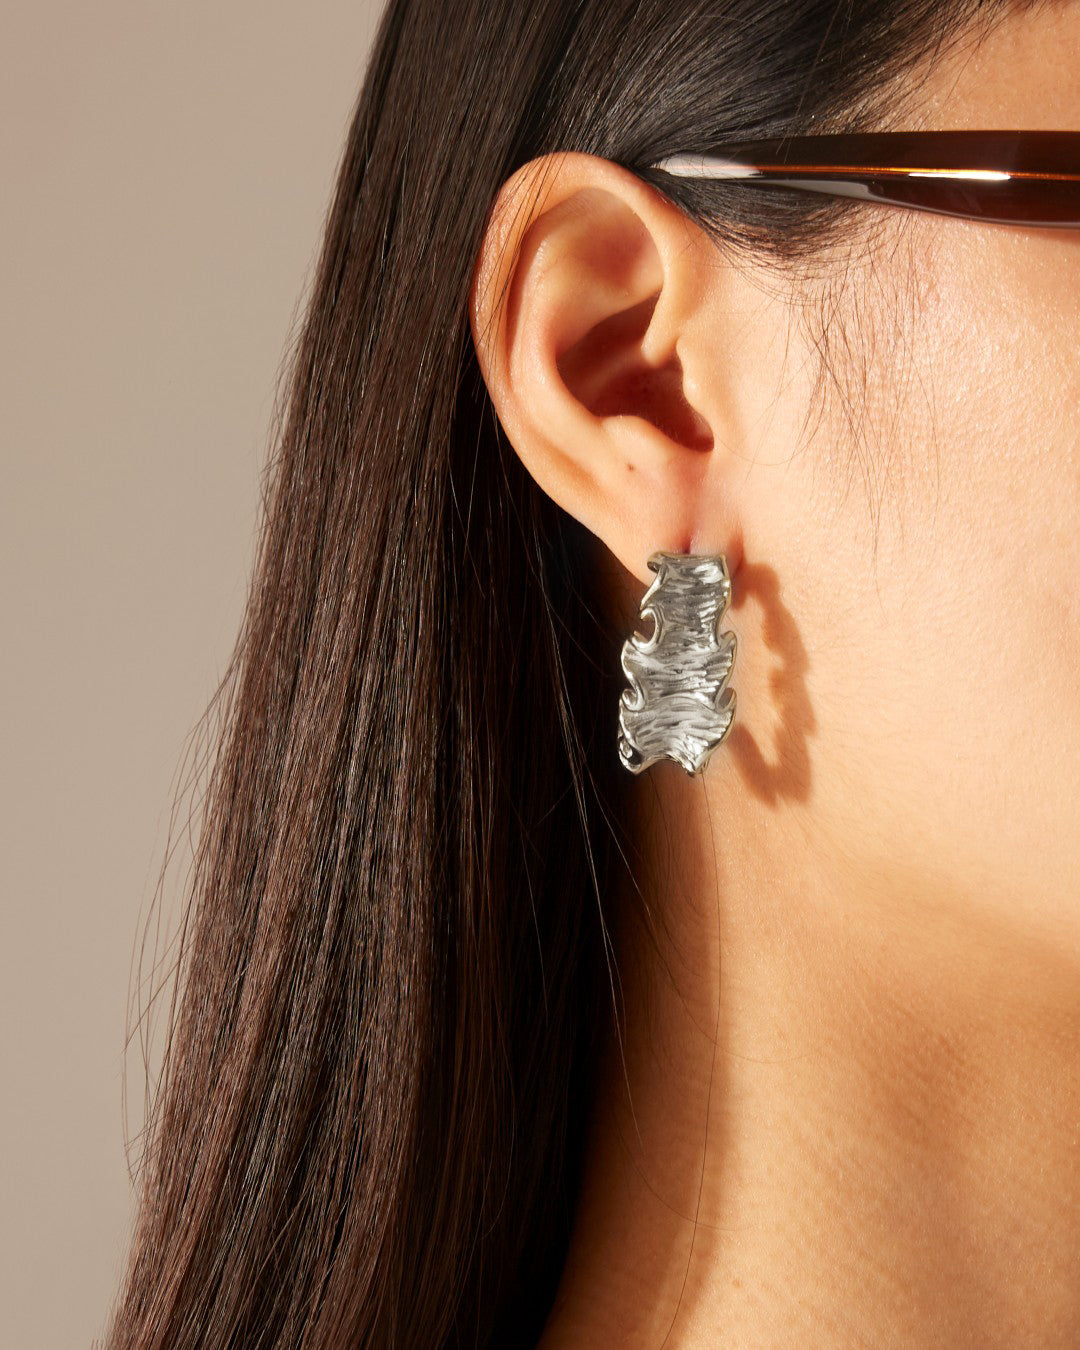 Close-up of a person with long dark hair, wearing large, handcrafted For Art's Sake® Athena Earrings Silver shaped like abstract leaves. The person is seen from the side, highlighting the earring. Their eyeglasses and part of their ear are also visible. The background is neutral.